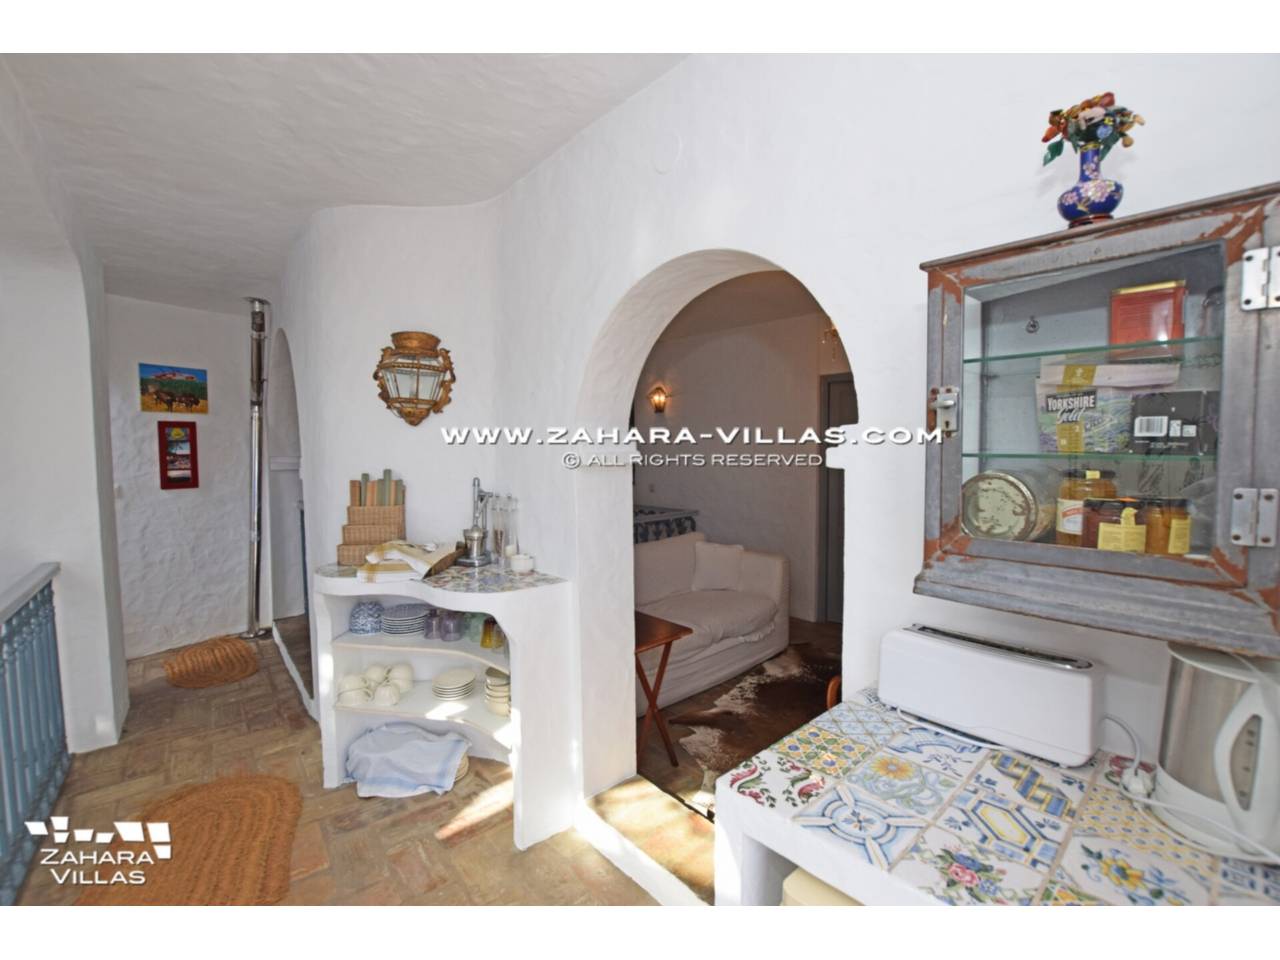 Imagen 53 de Magnificent House with central patio, in the historic center of the town